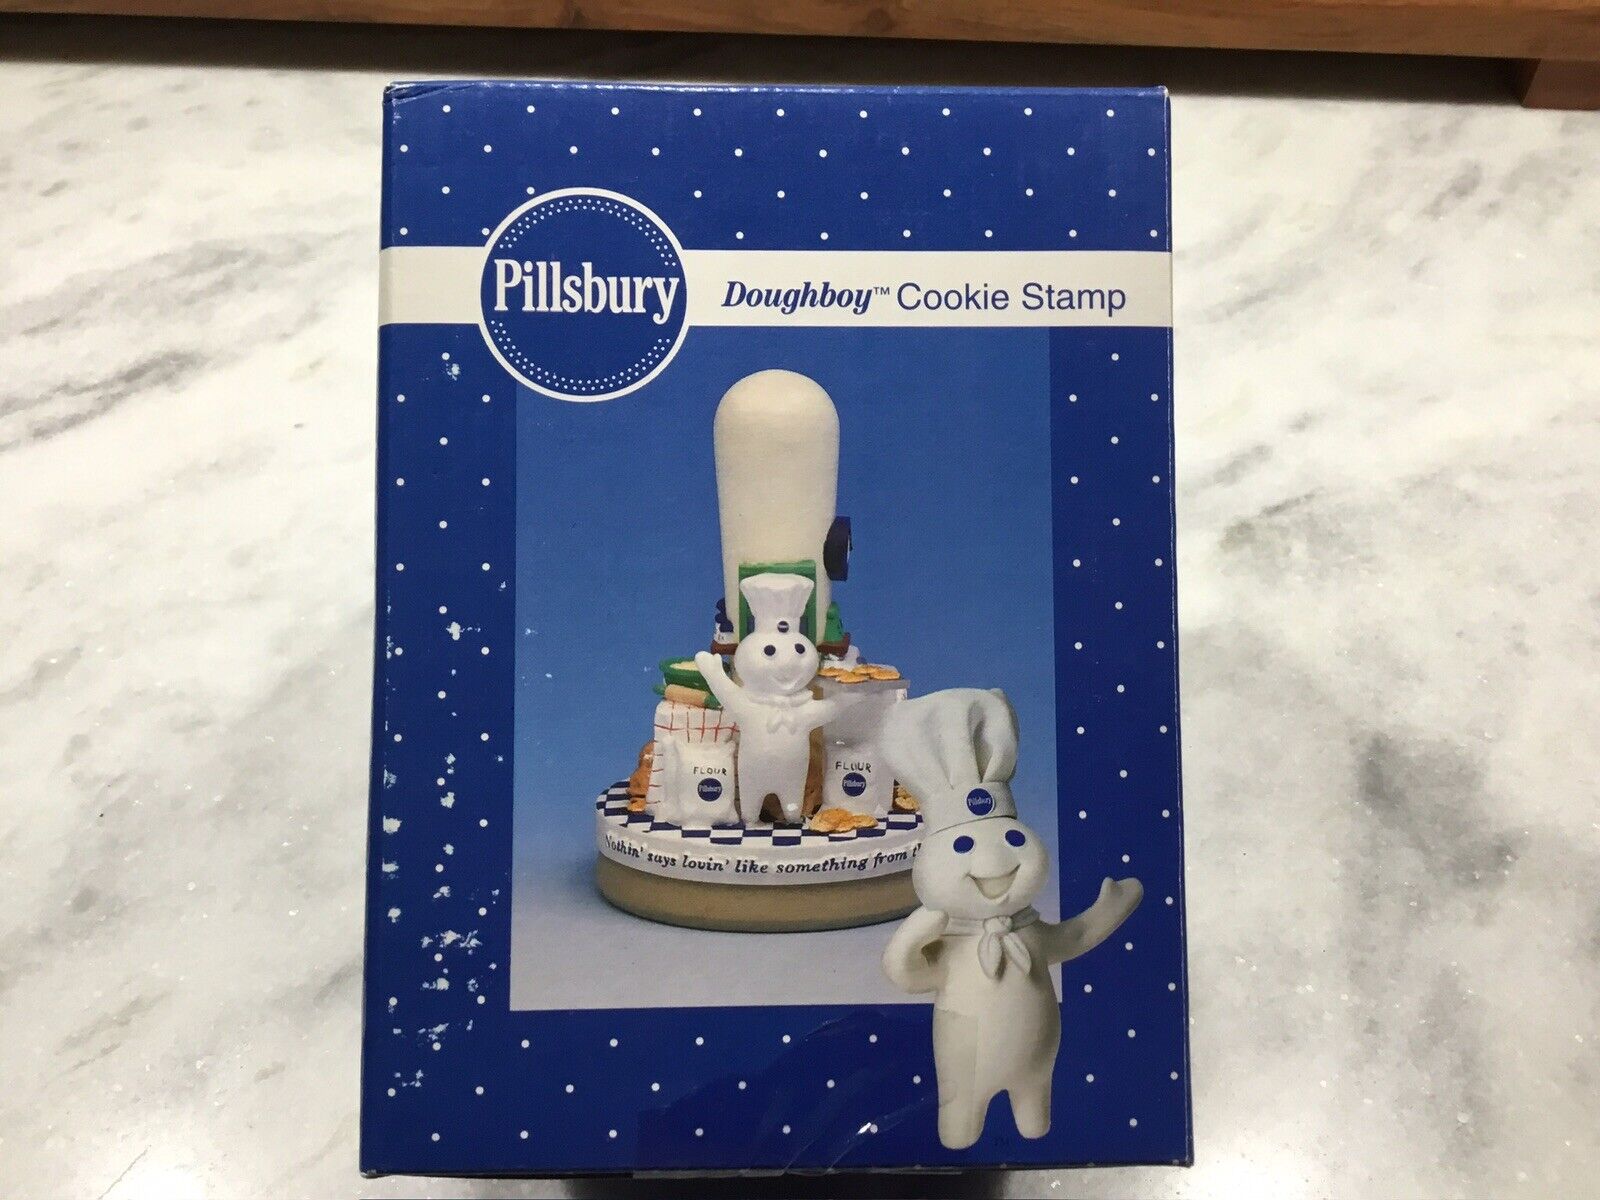 Vintage 1998 Pillsbury Doughboy Cookie Stamp with Tag - s4d